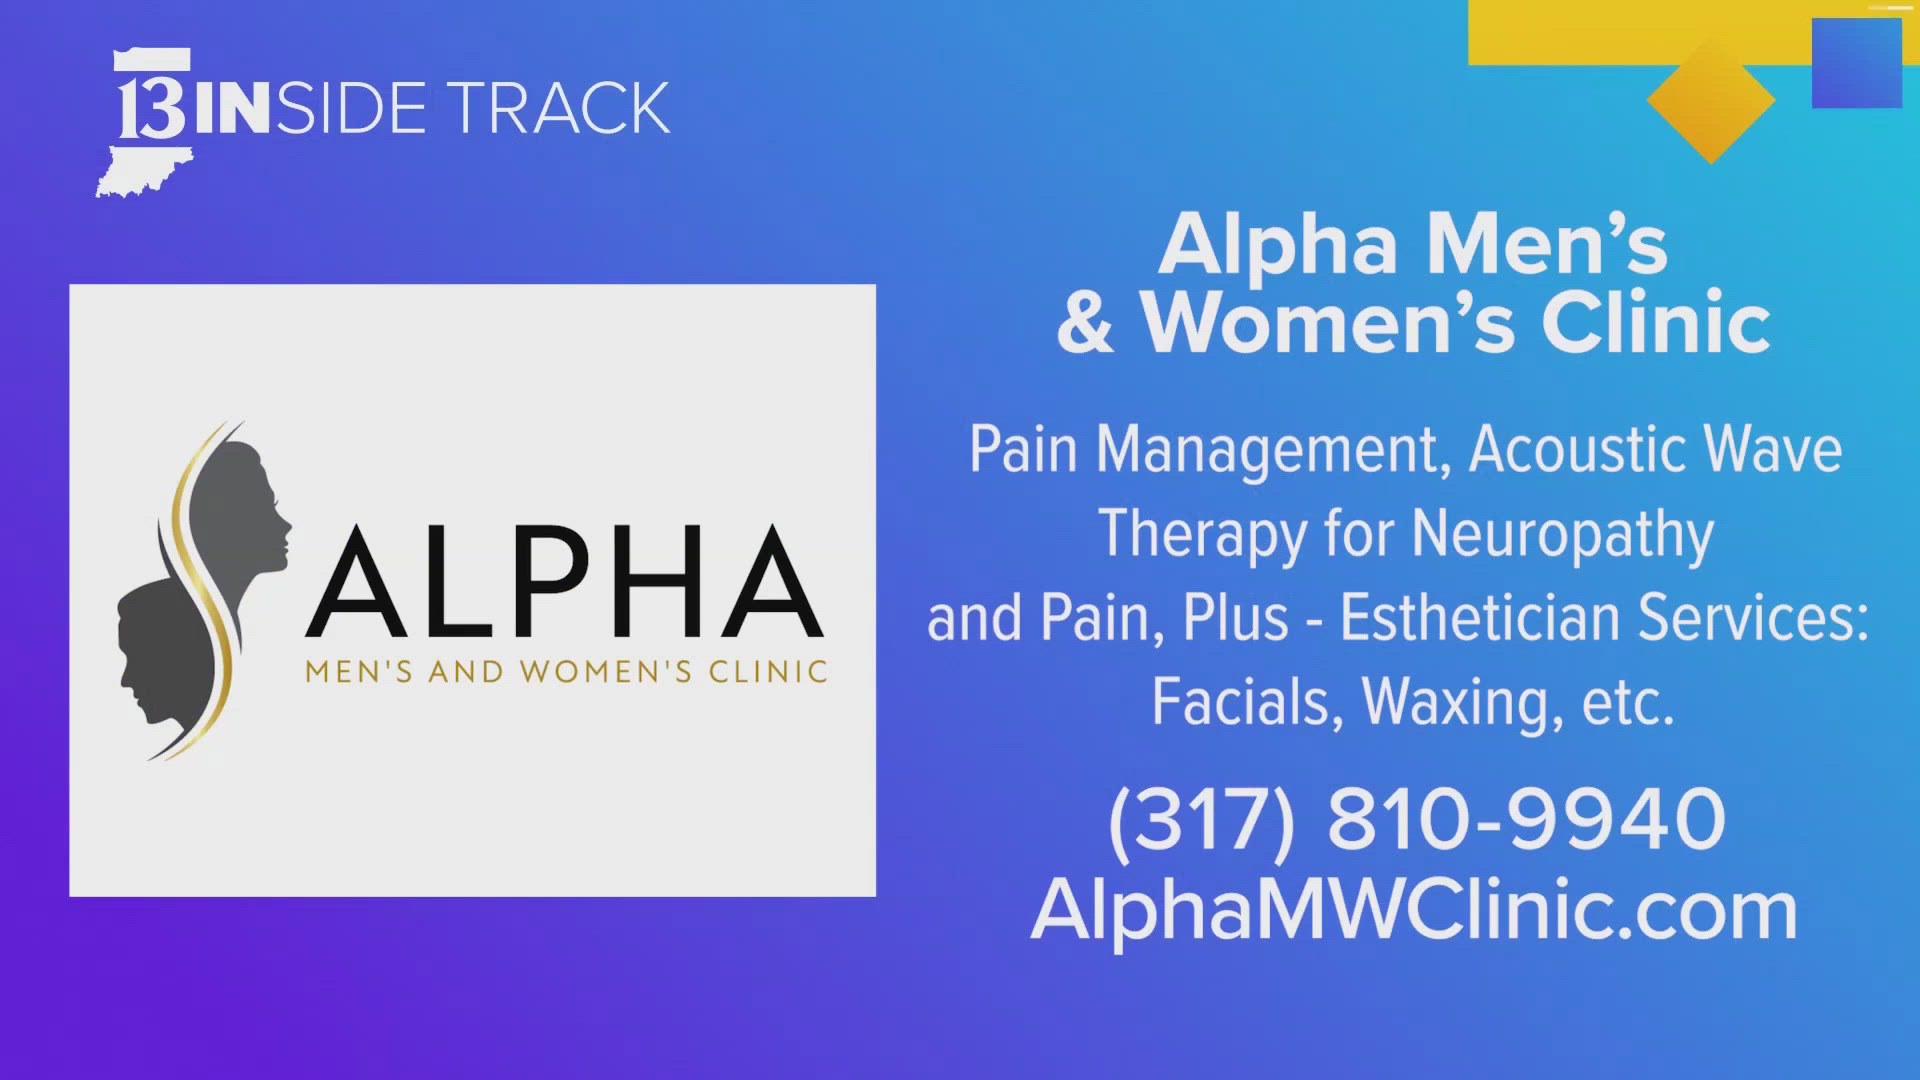 Alpha Men's & Women's Clinic offers innovative pain management solutions and aesthetic services, enhancing well-being through advanced treatments.